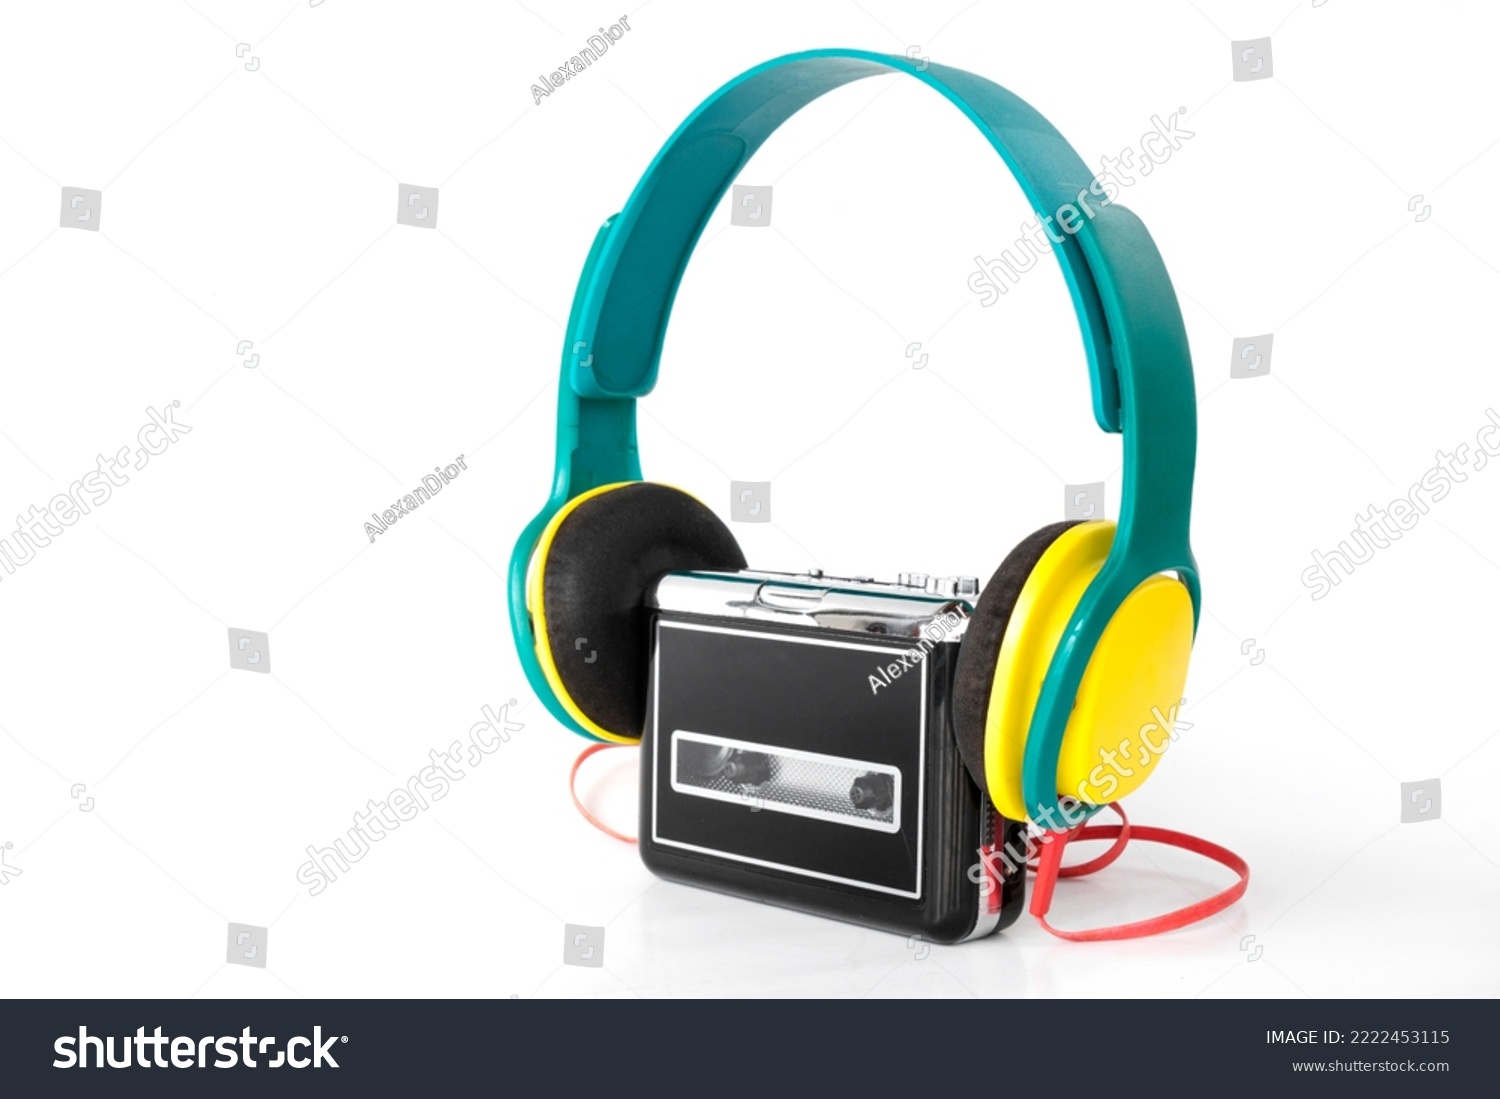 portable cassette walkman from the 90s with headphones, on isolated white background #2222453115